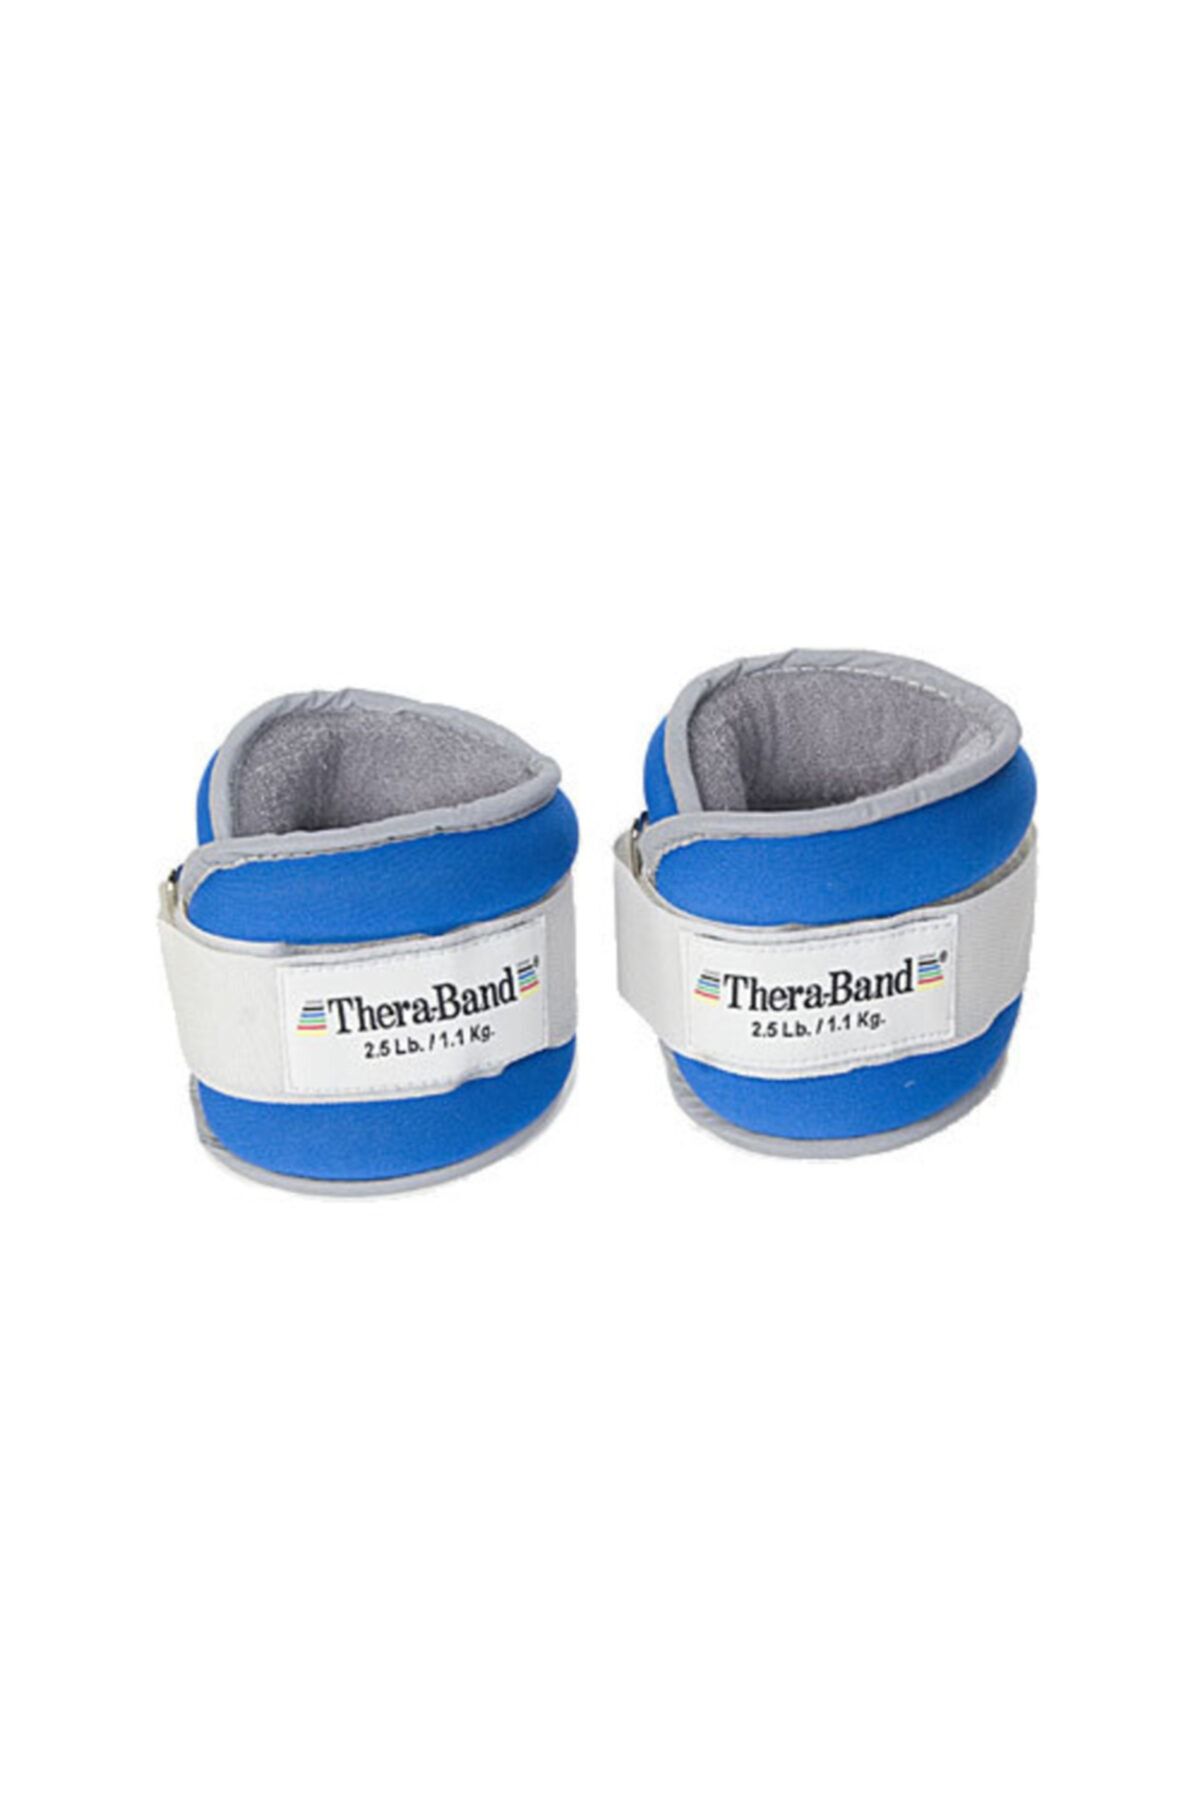 Theraband Comfort Ankle Weıghts Blu 5 Lb